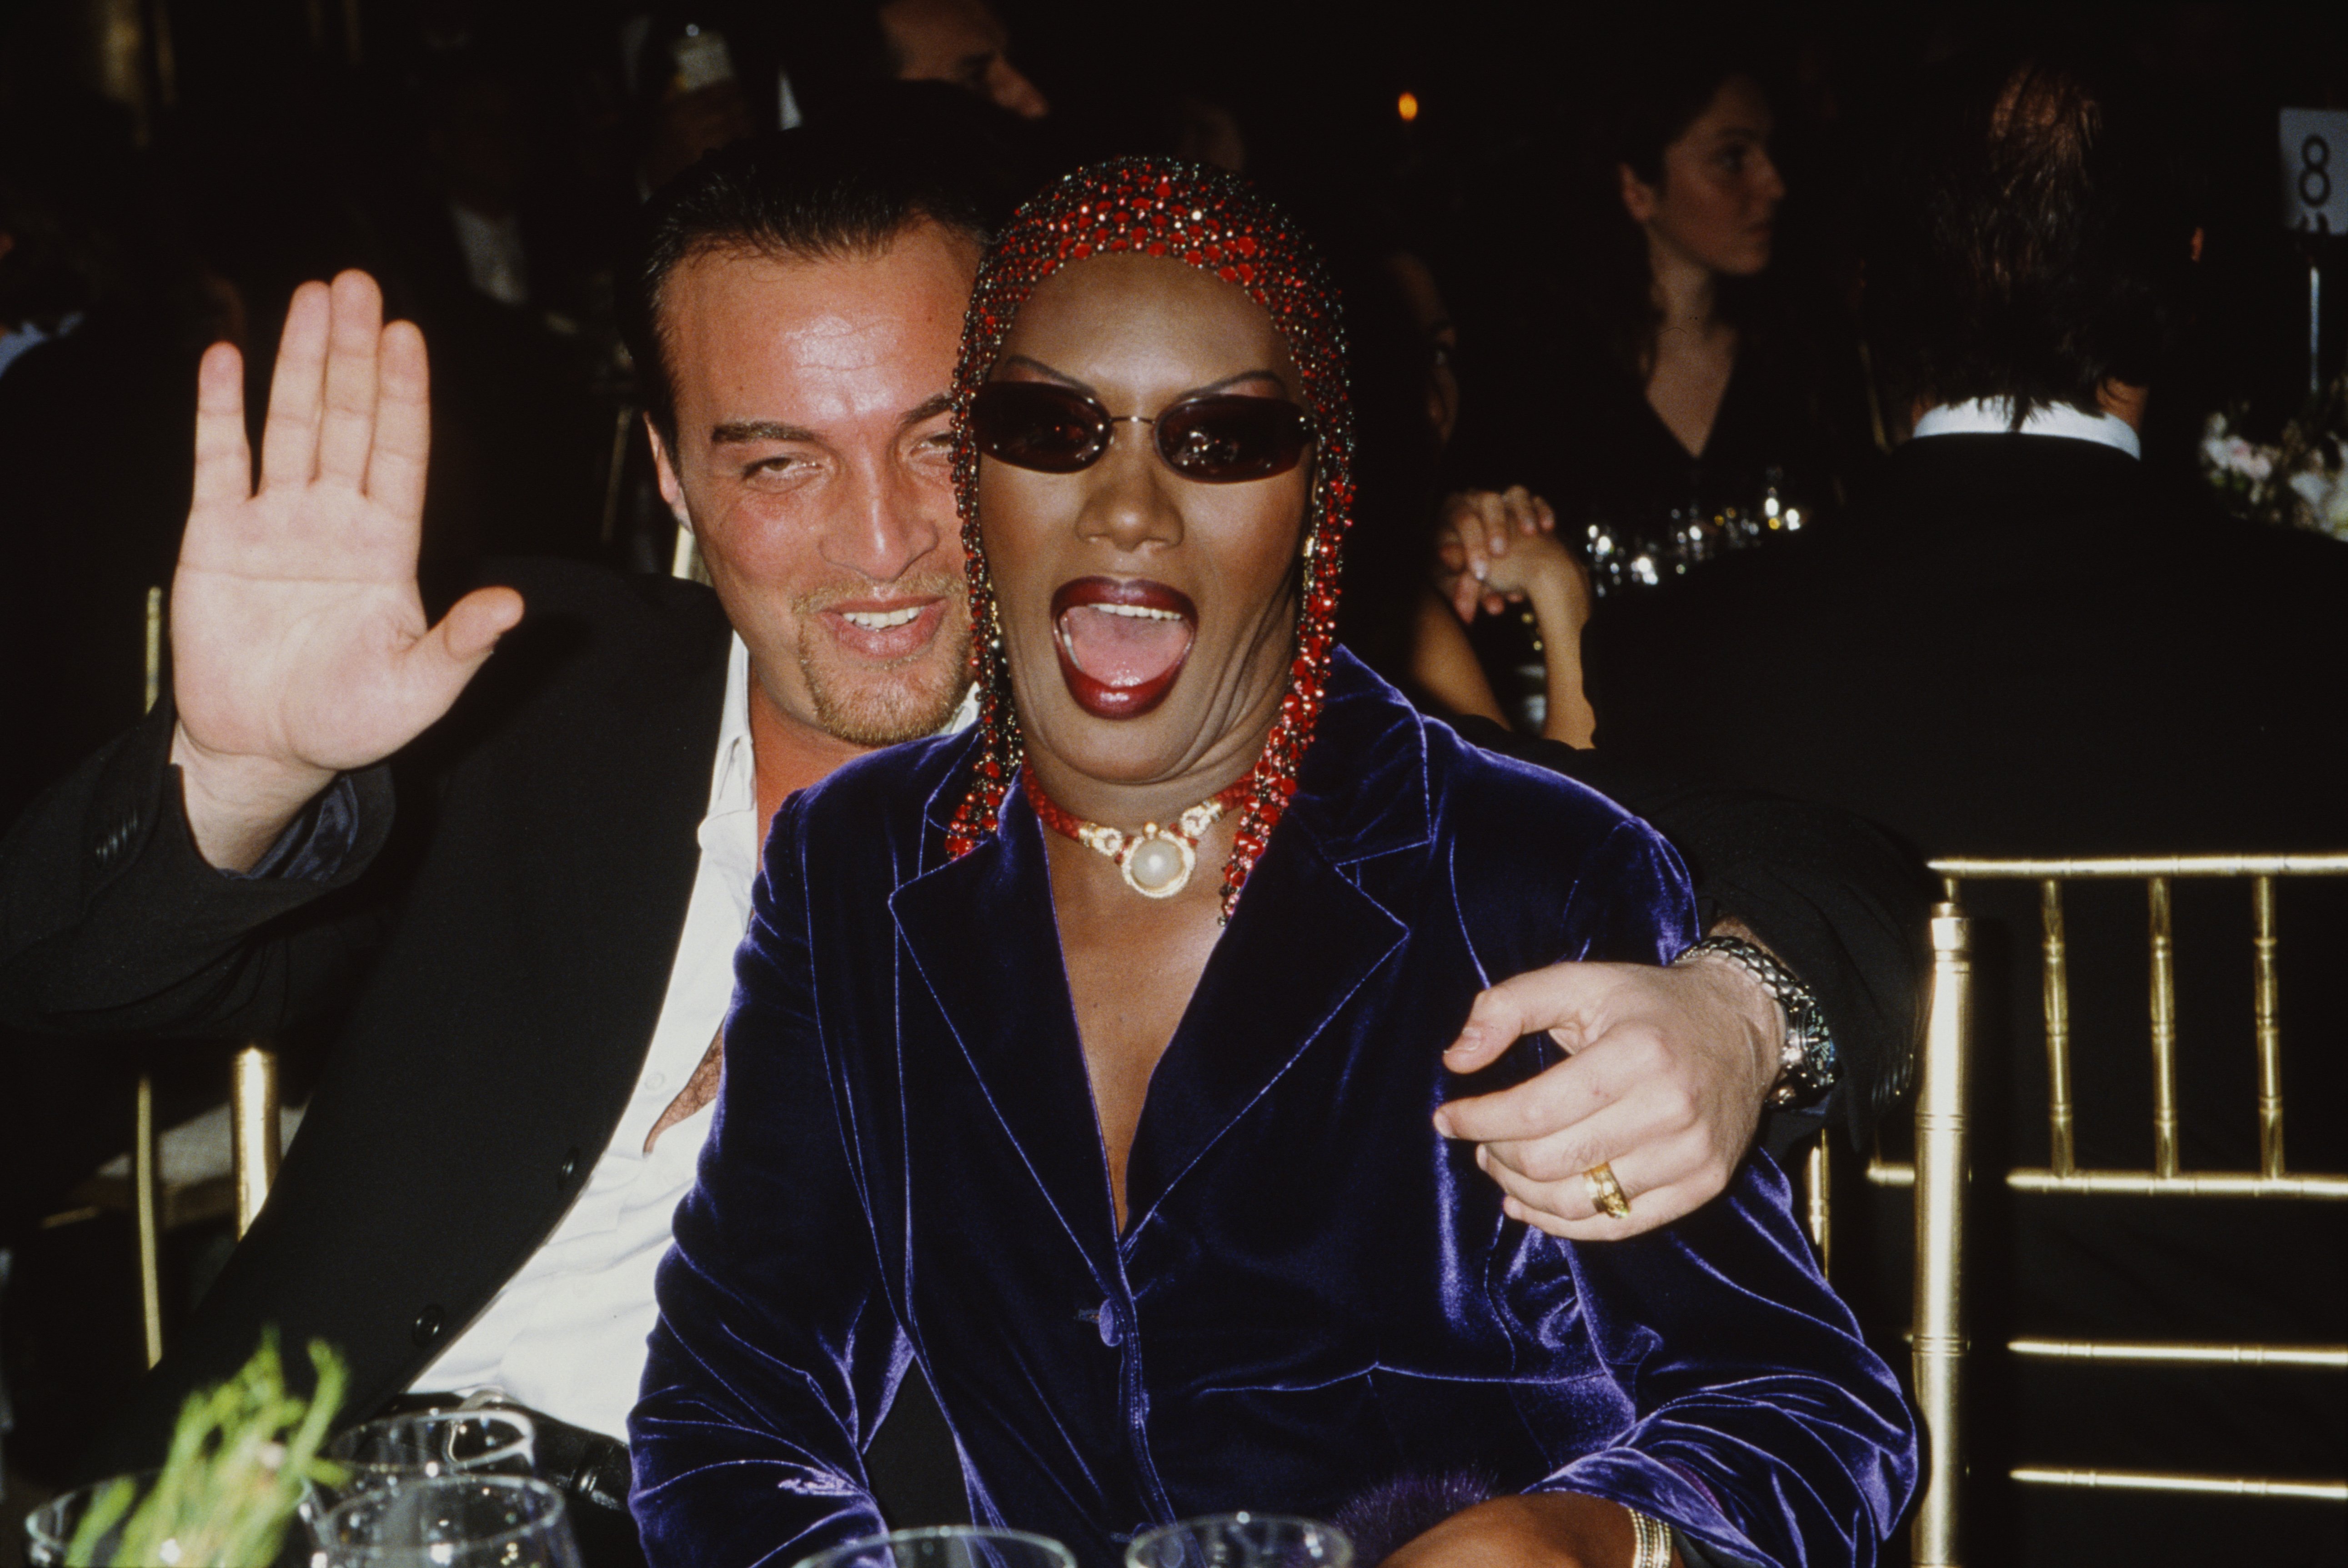 Jamaican singer, actress and model Grace Jones and her husband, Atila Altaunbay, attend the 'Made In Italy' awards ceremony at Cipriani, 42nd Street, New York City, 2000 | Photo: Getty Images